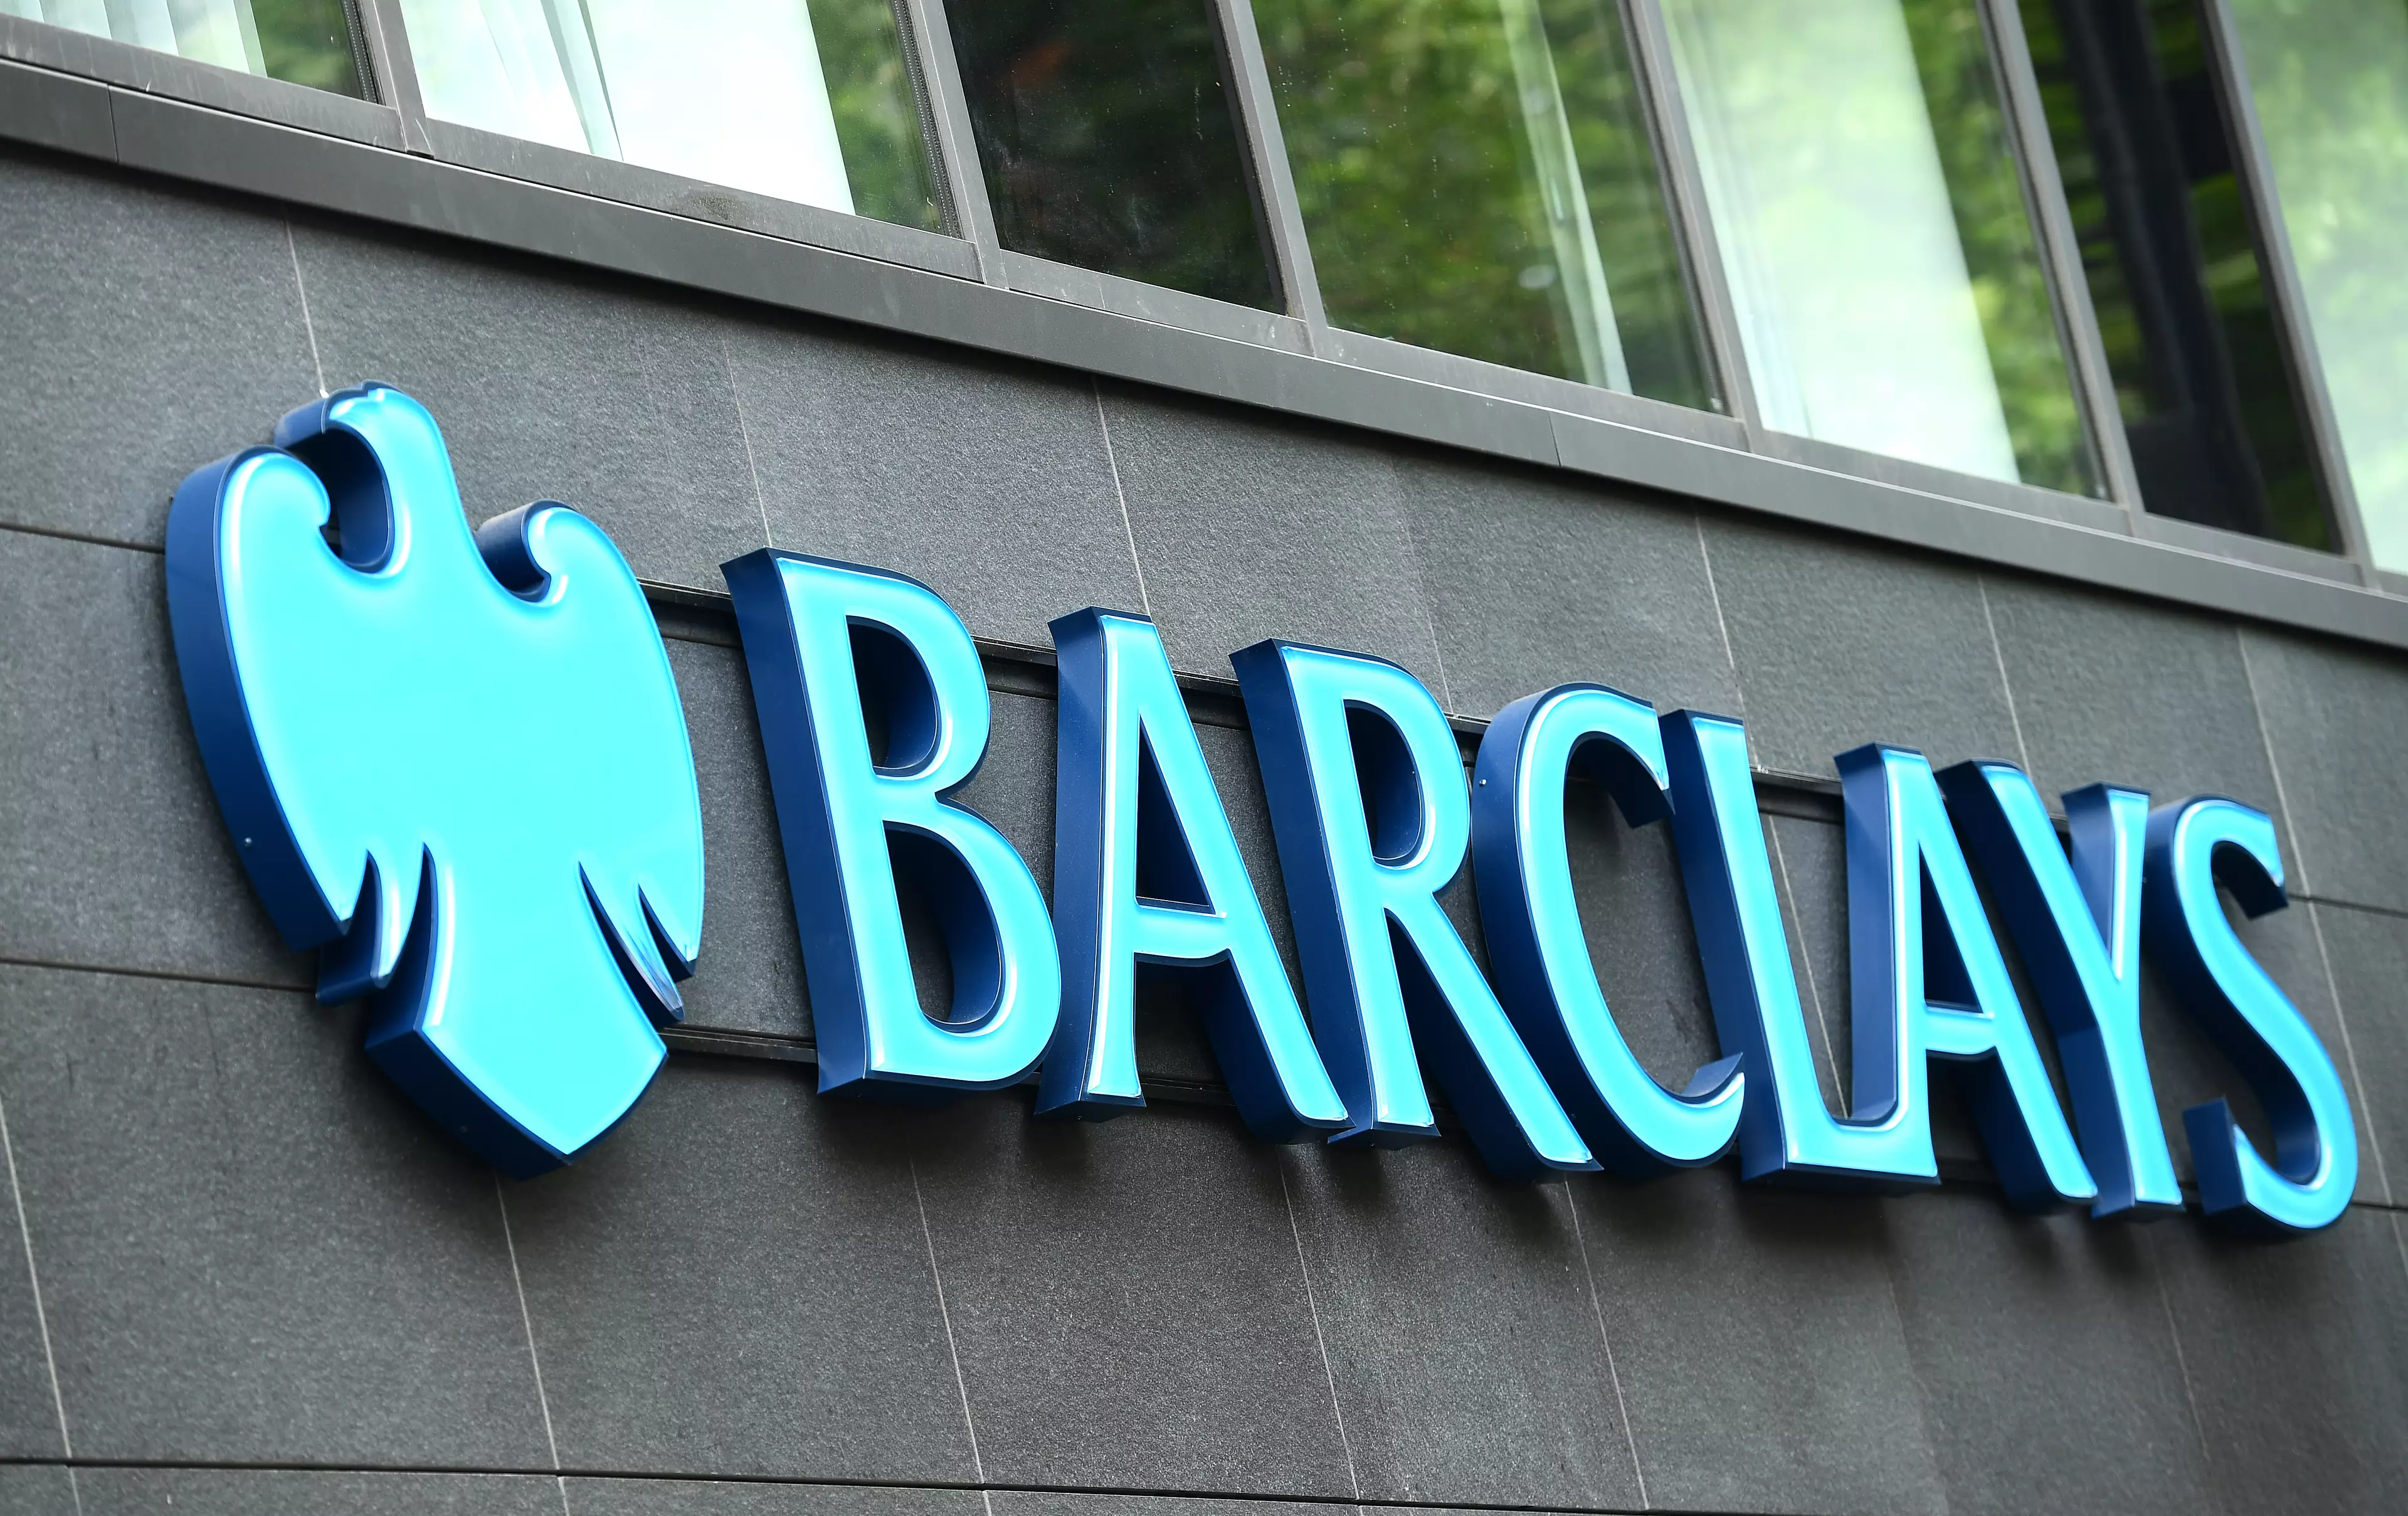 Barclays has now agreed to pay Mr Teich's legal fees and offered £750 compensation.